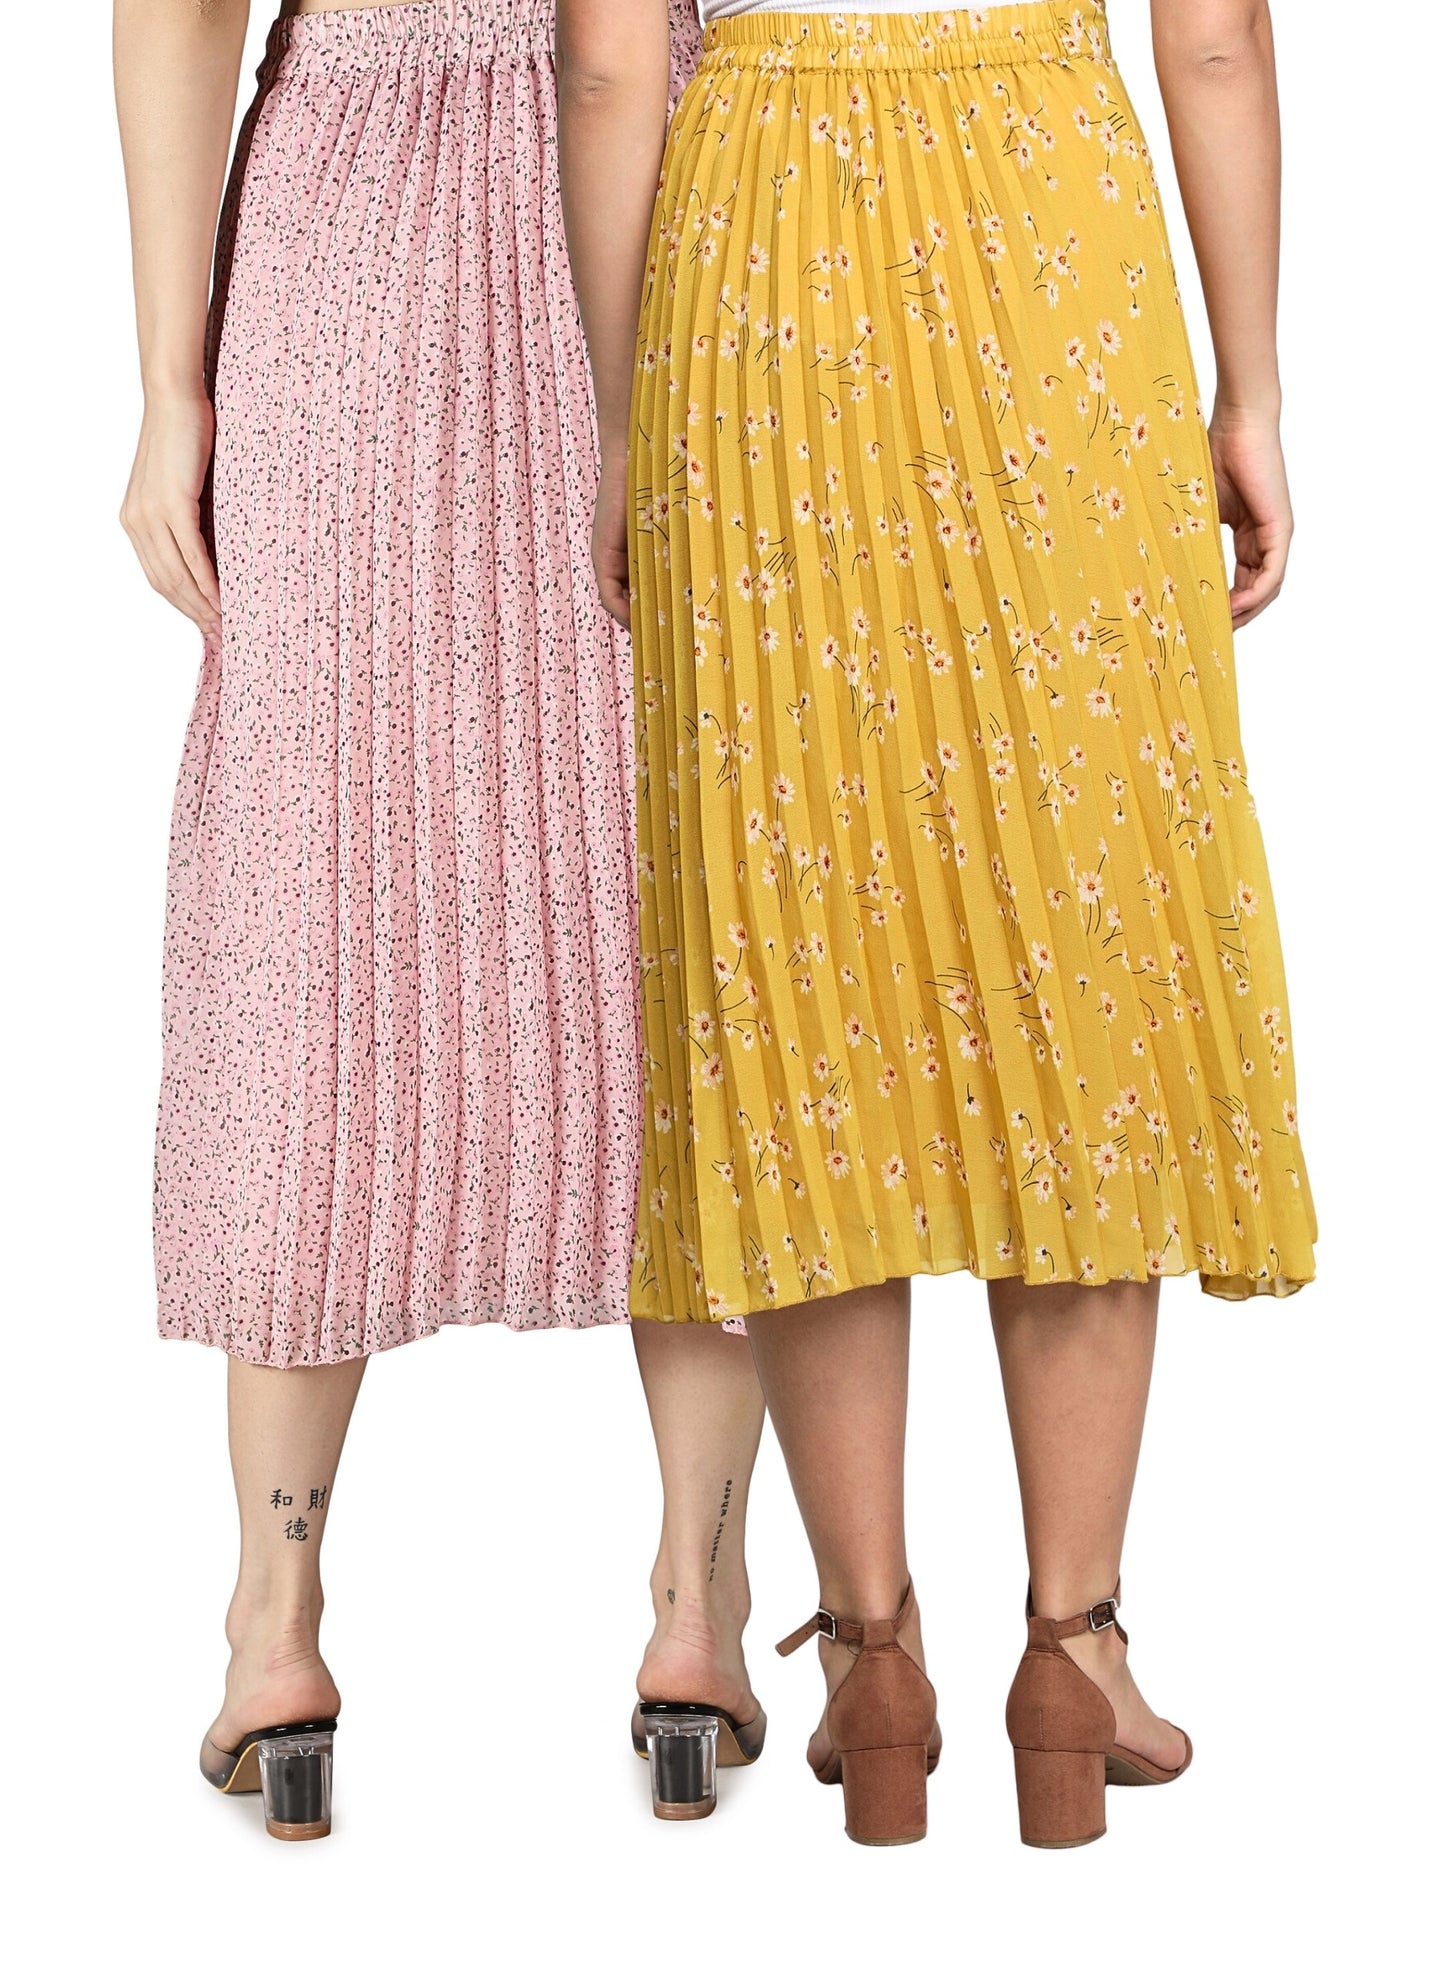 NUEVOSDAMAS Women Georgette Floral Printed Skirts-Pack of Two-Pink and Yellow